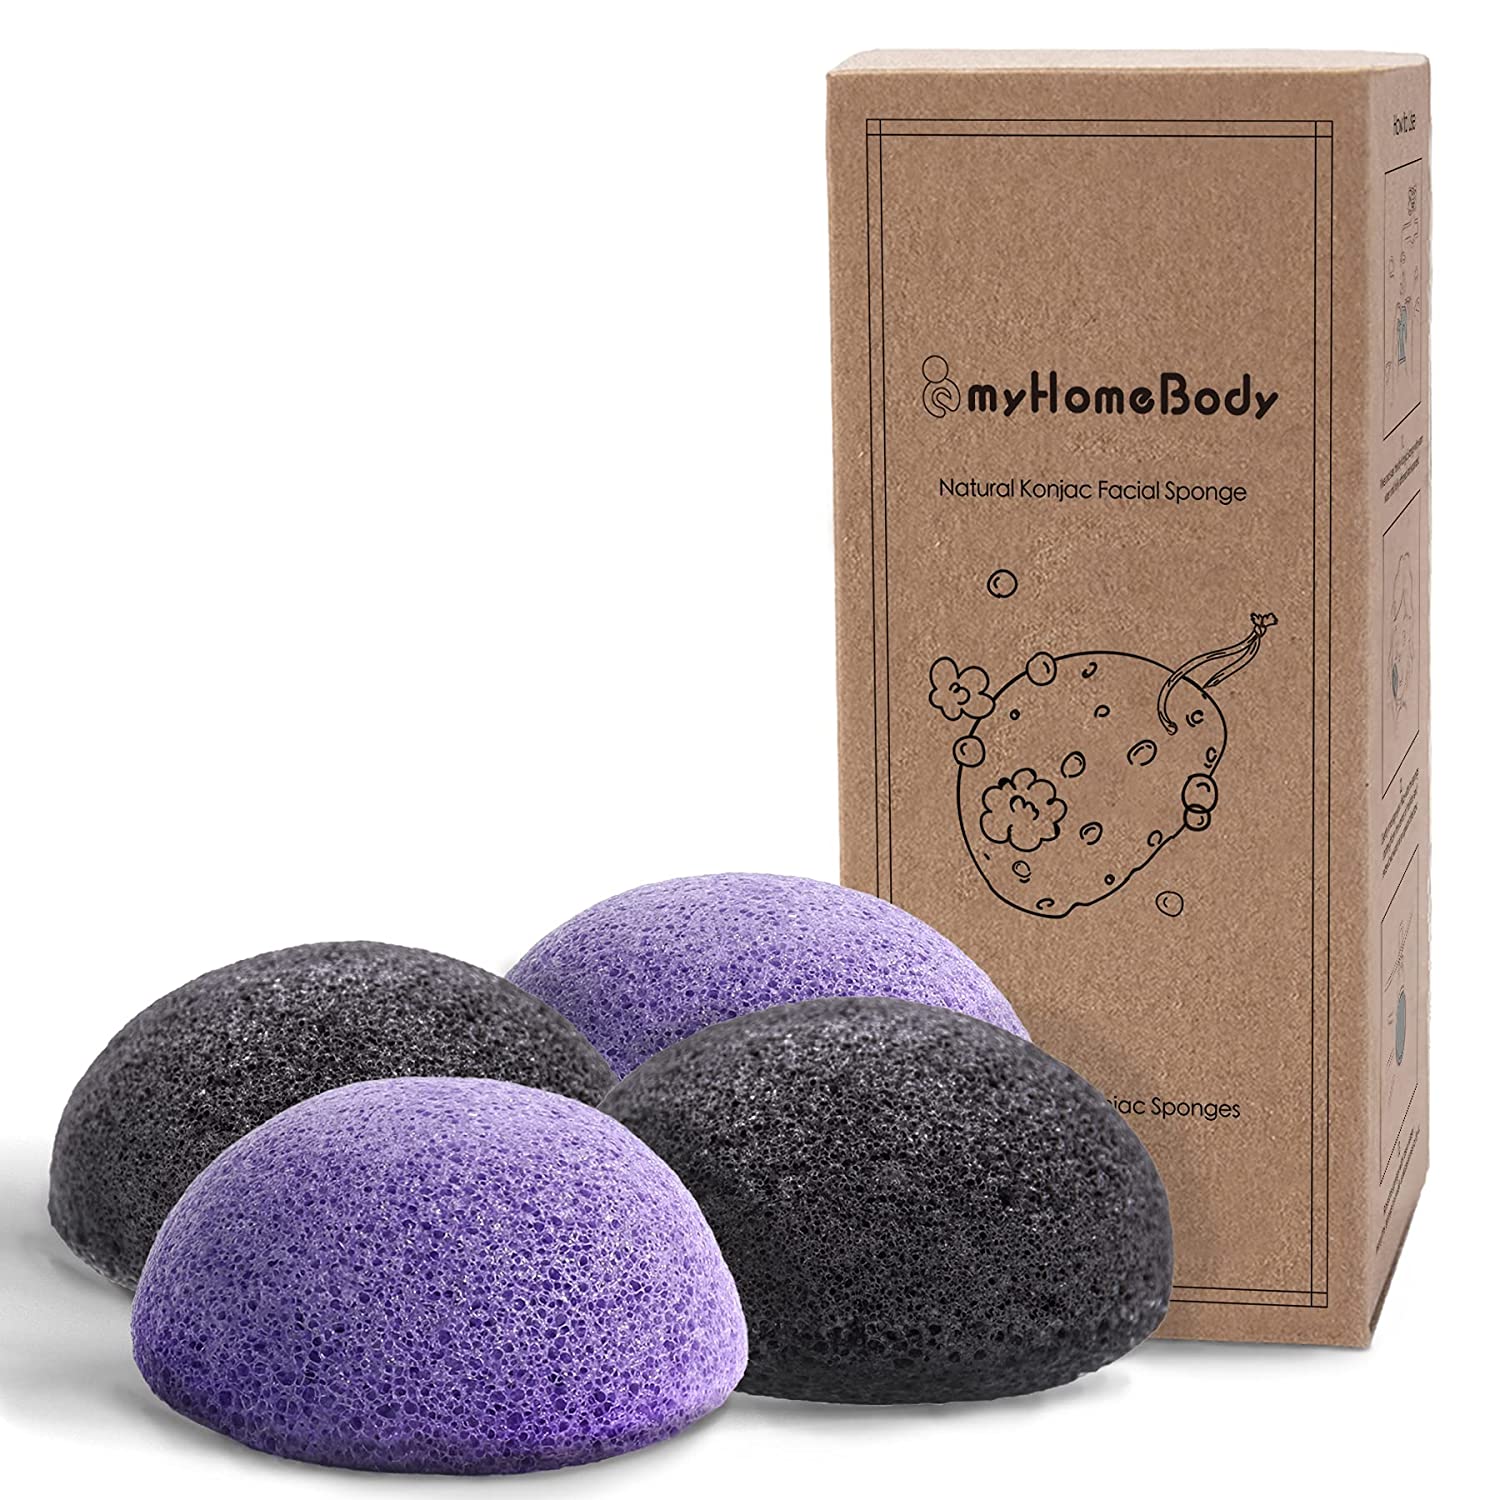 Natural Konjac Facial Sponges - for Gentle Face Cleansing and Exfoliation